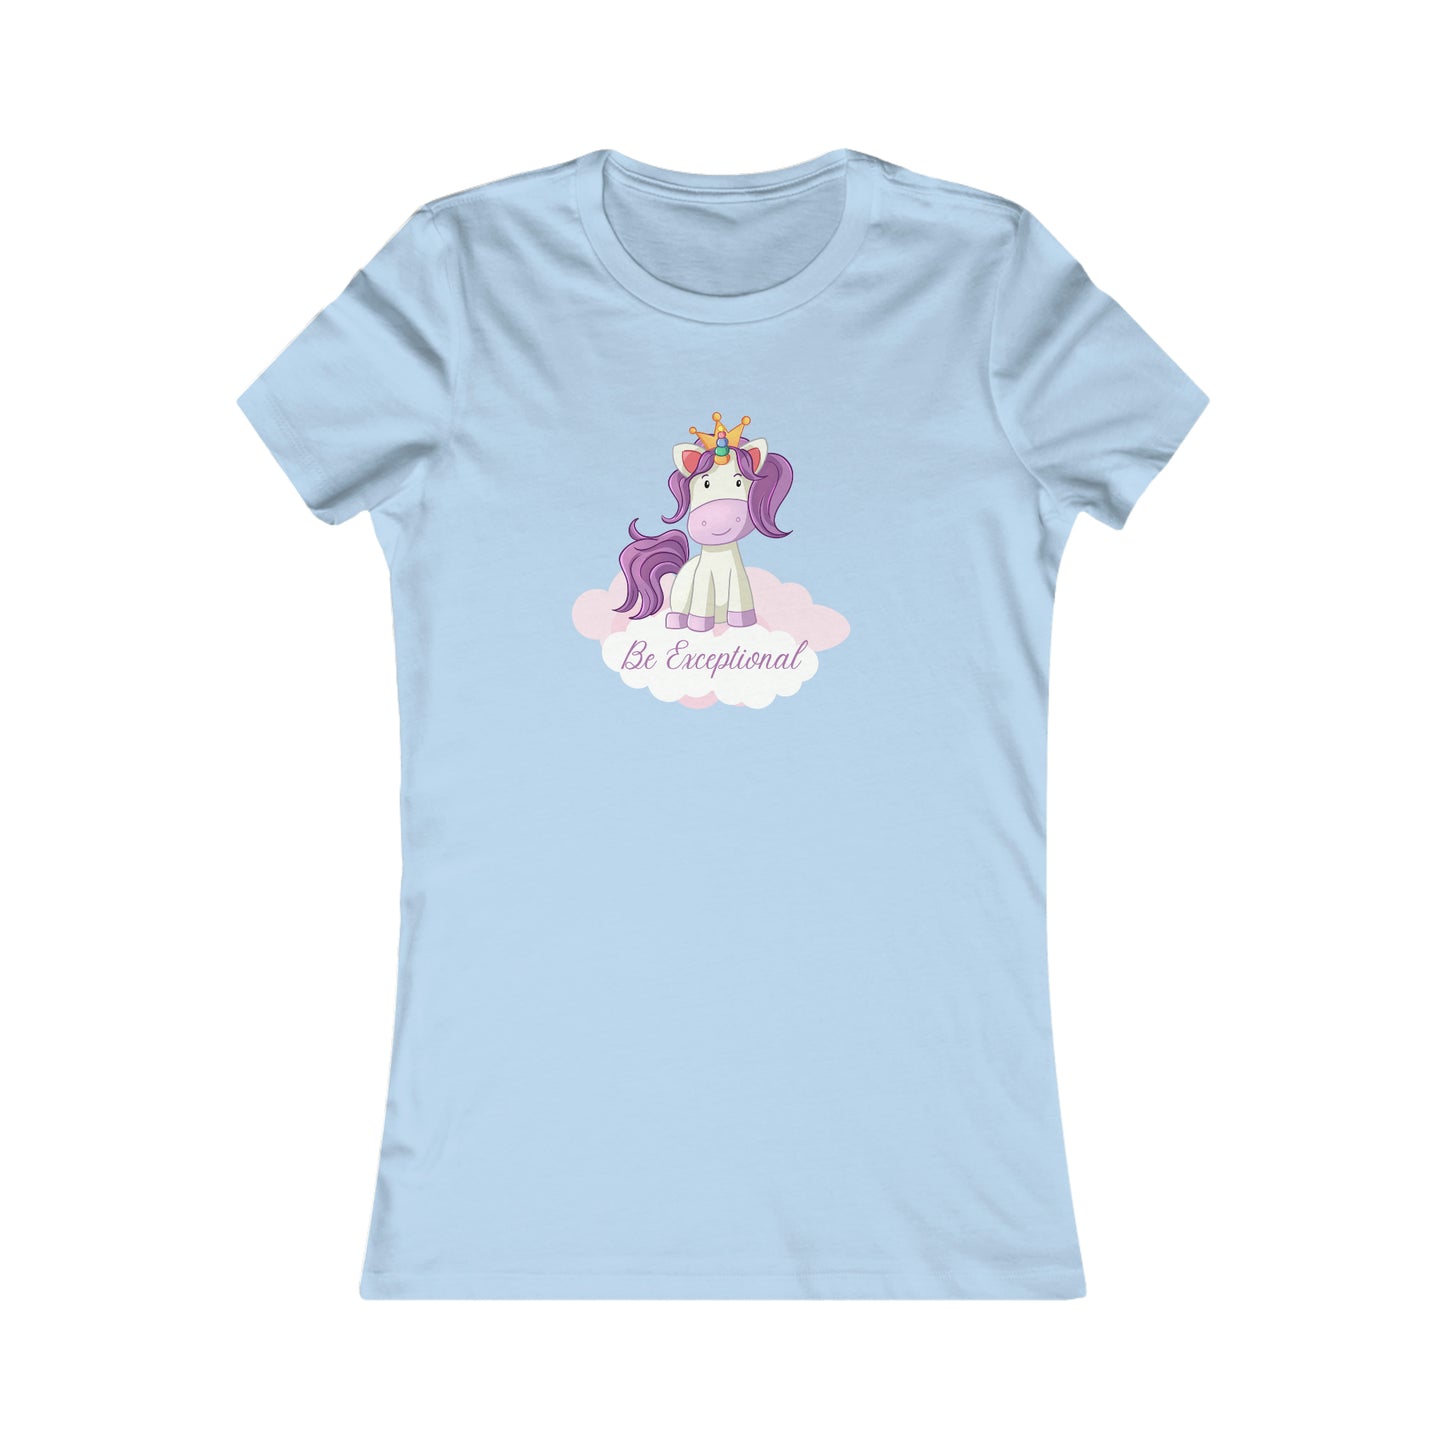 Be Exceptional - Women's Favorite Tee